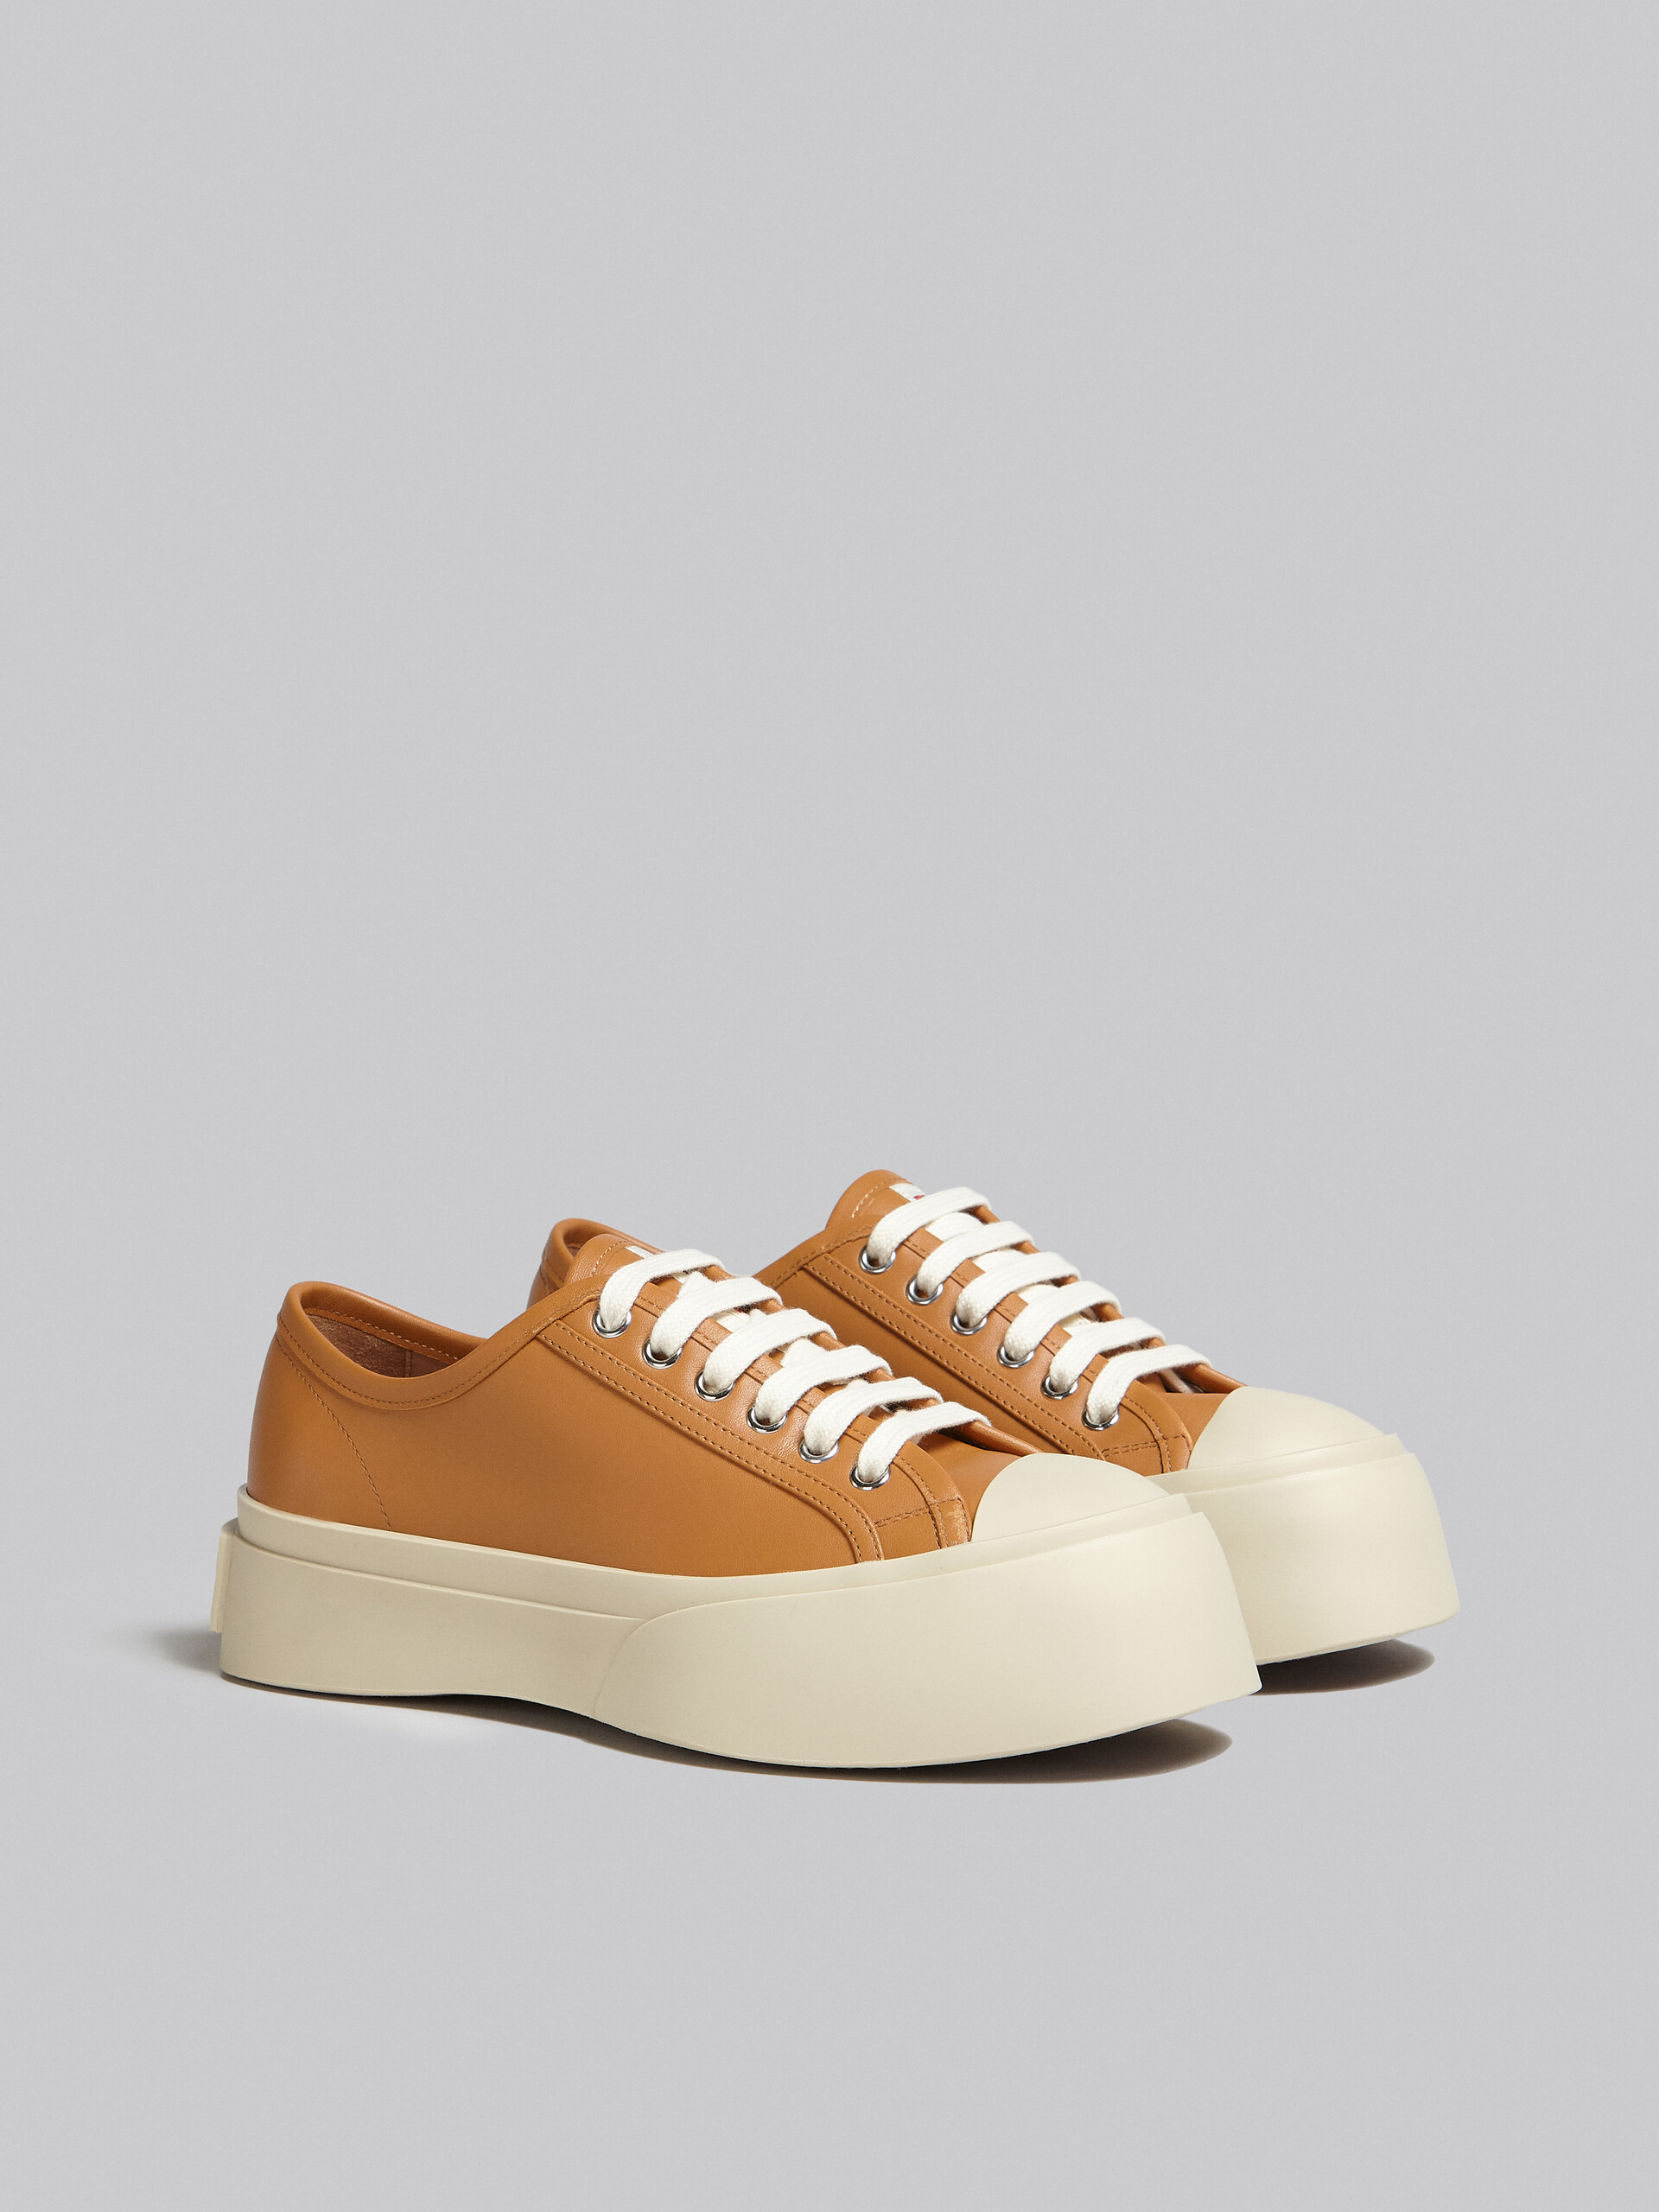 Brown nappa leather Pablo lace-up sneaker - Sneakers - Image 2